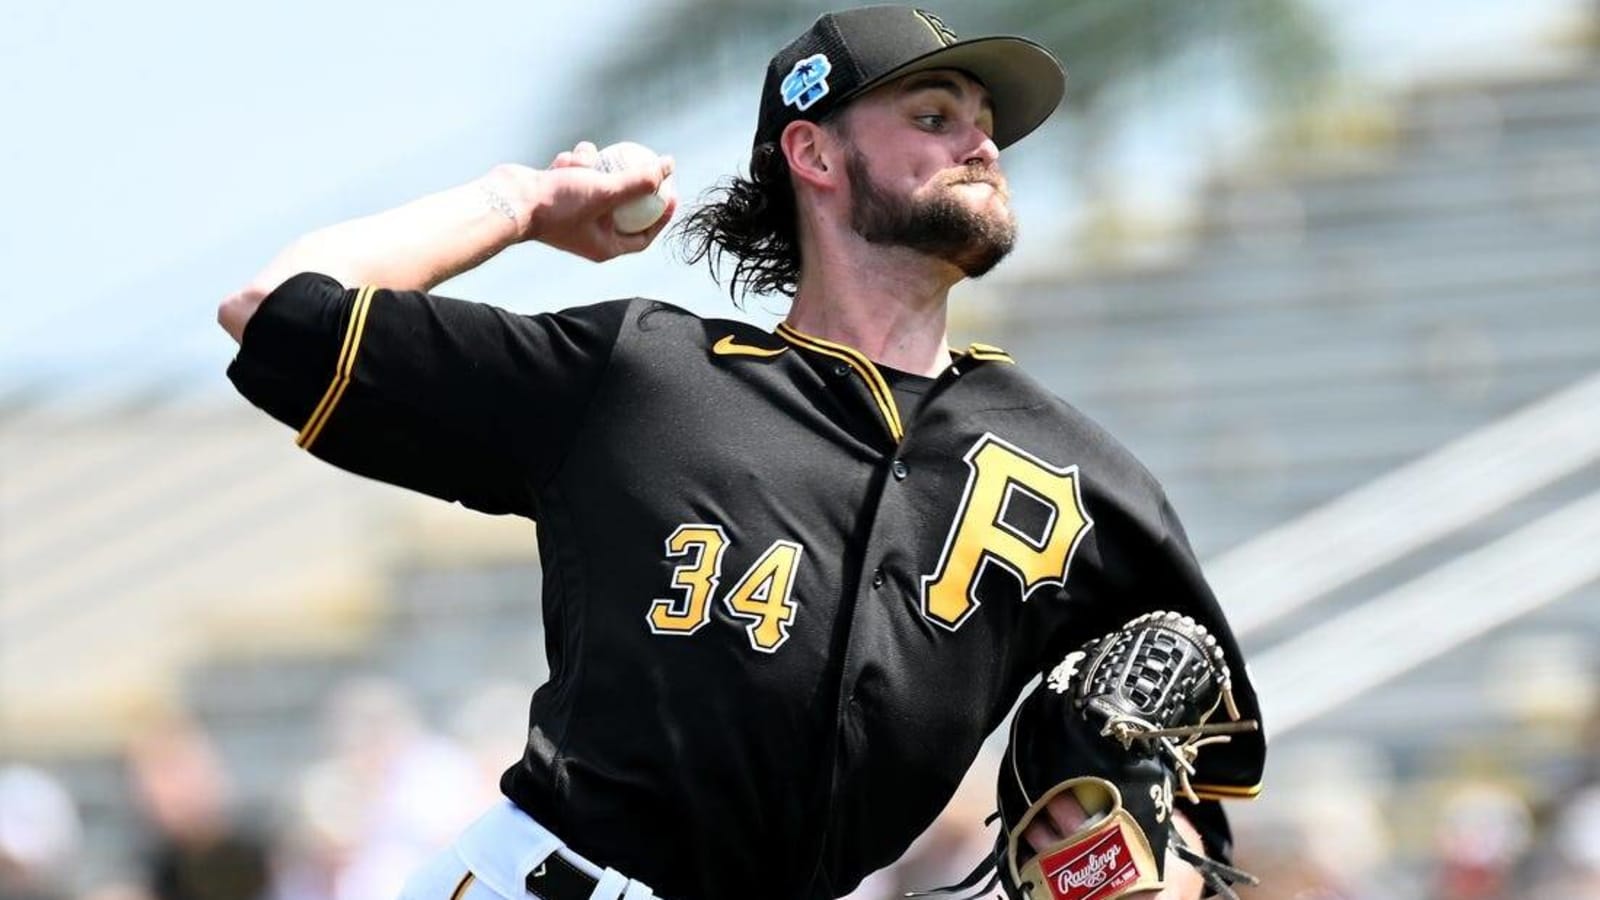 Pirates RHP JT Brubaker out for season after elbow surgery